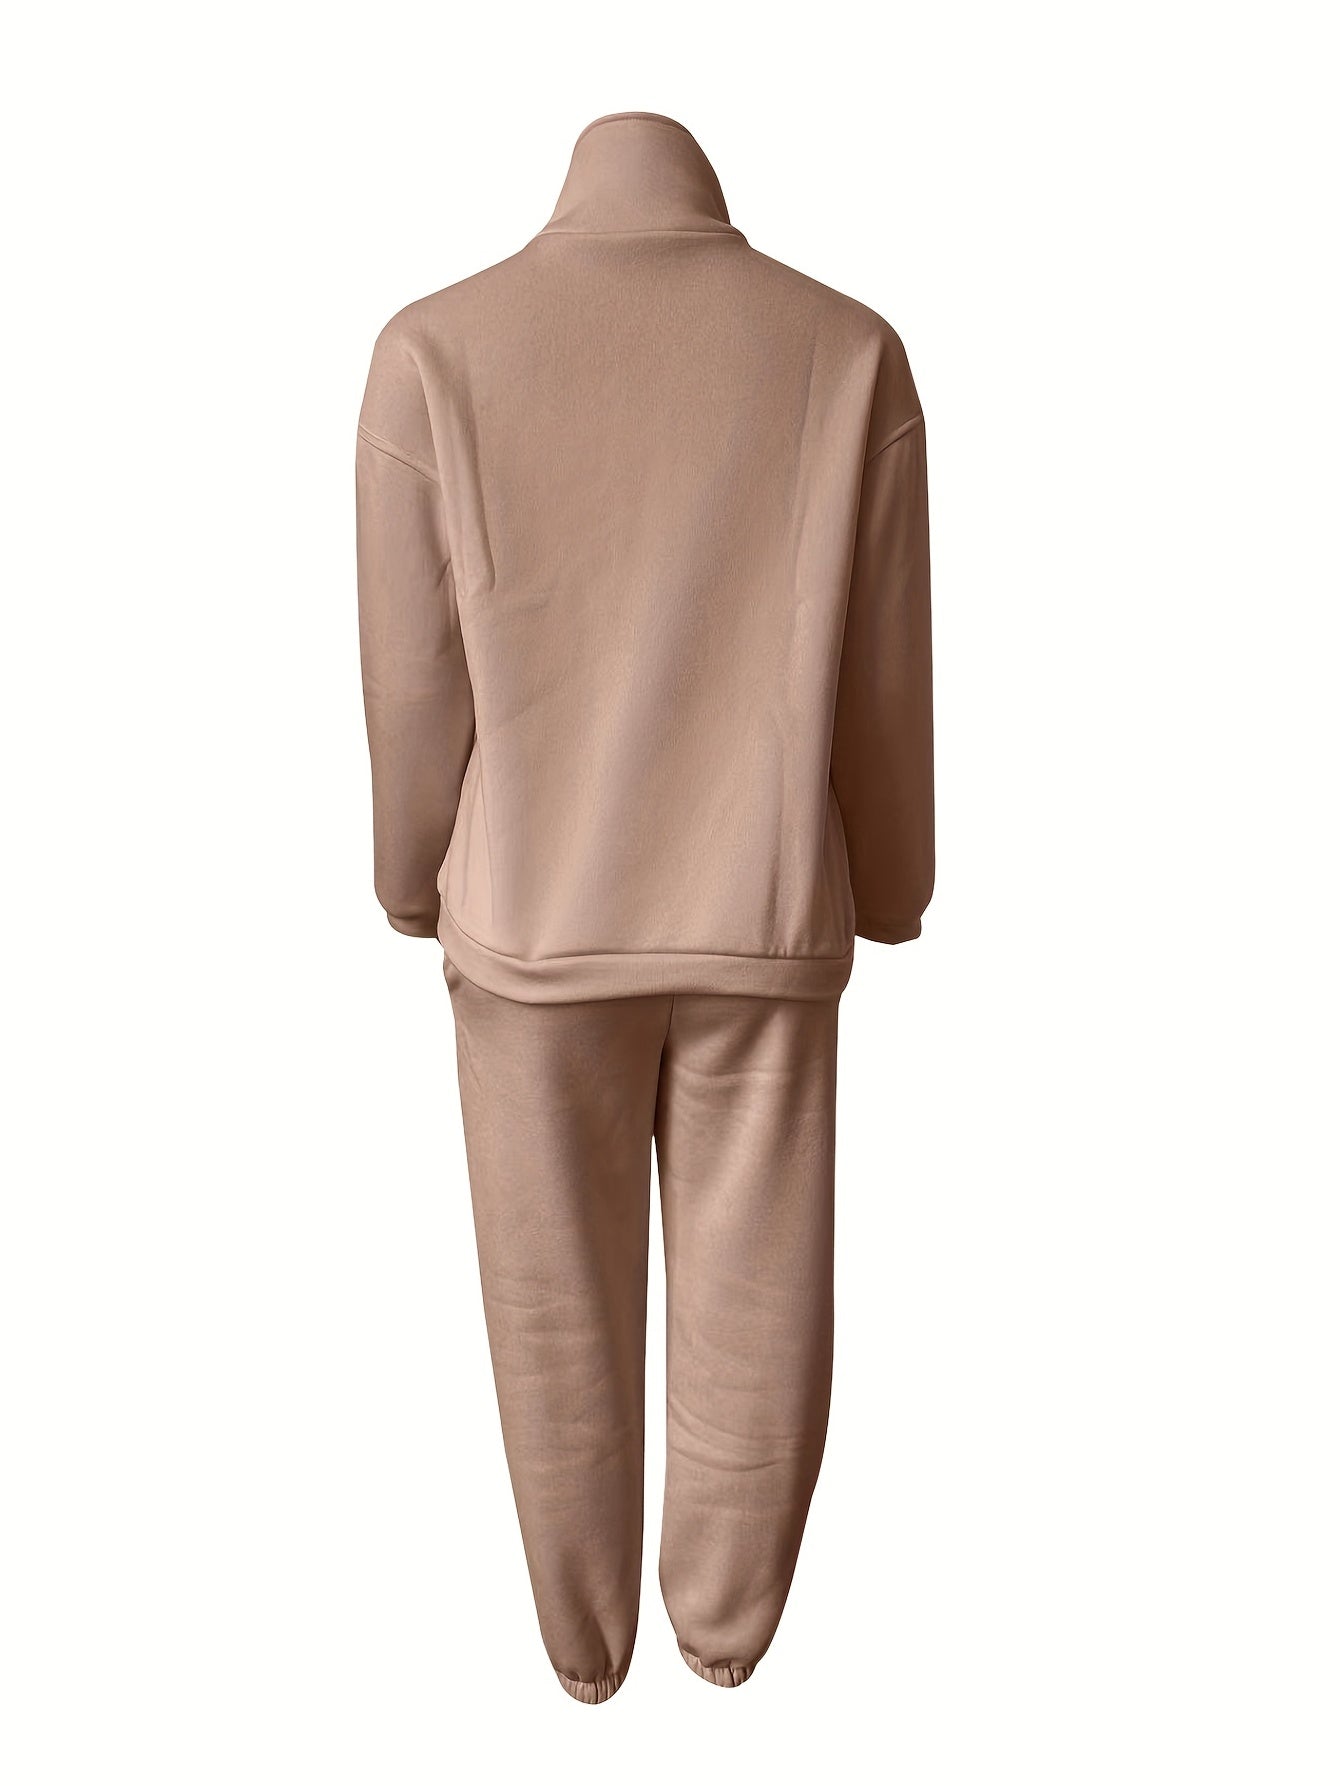 Casual Matching Two-piece Set, Zip Up Sweatshirt  & Solid Sweatpants Outfits, Women's Clothing